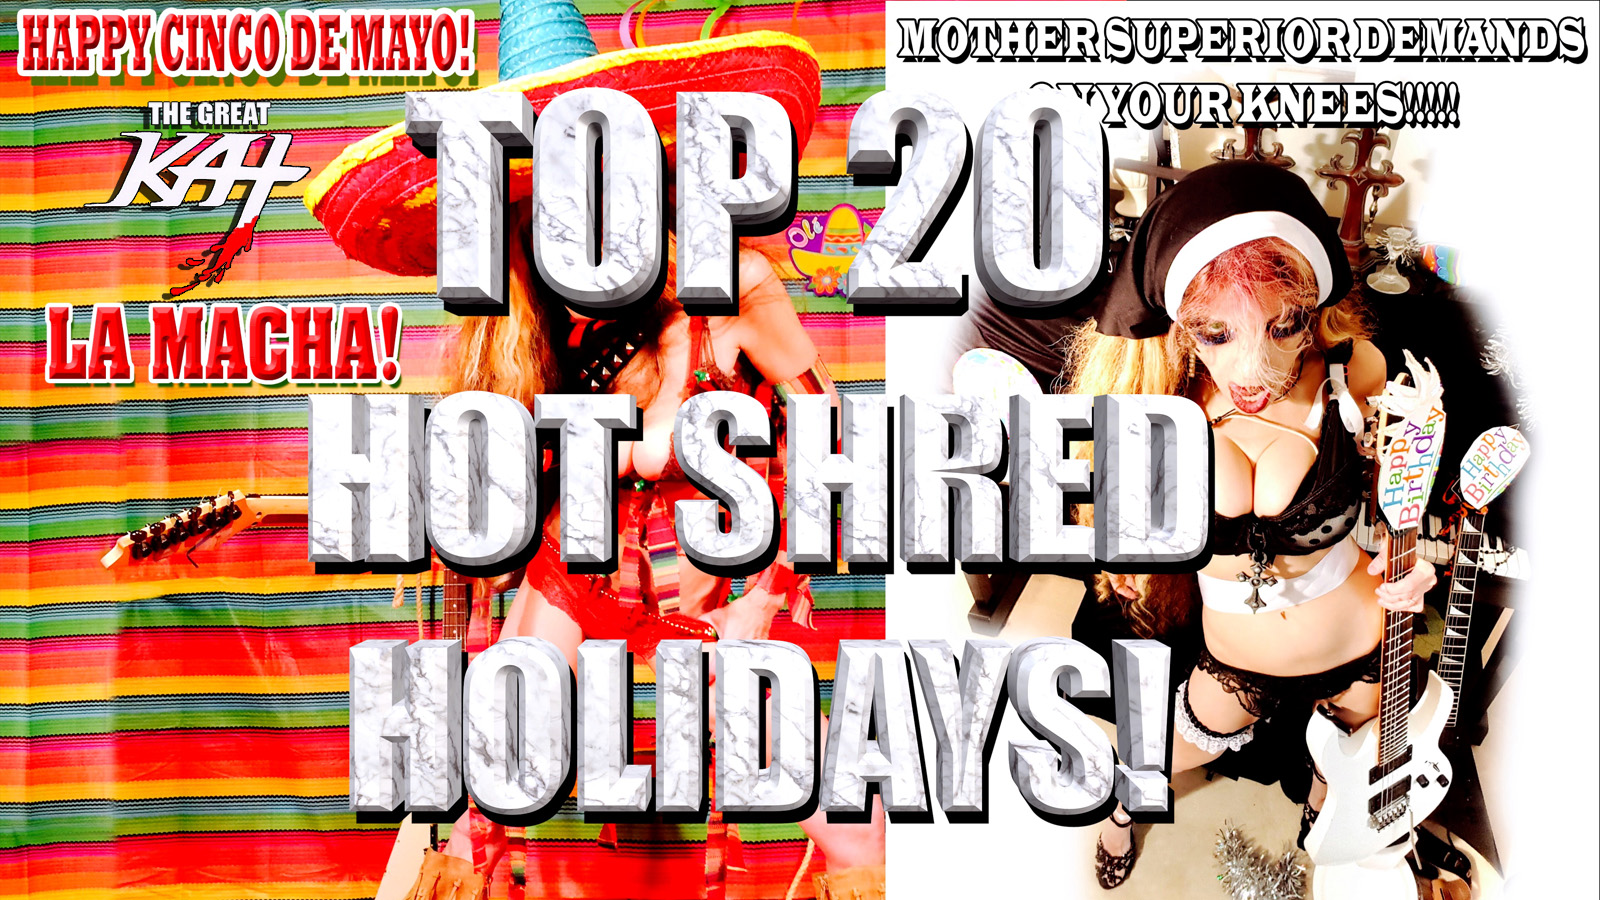 THE GREAT KAT'S "TOP 20 HOT SHRED HOLIDAYS! From The Great Kat's NEW DVD!!!!